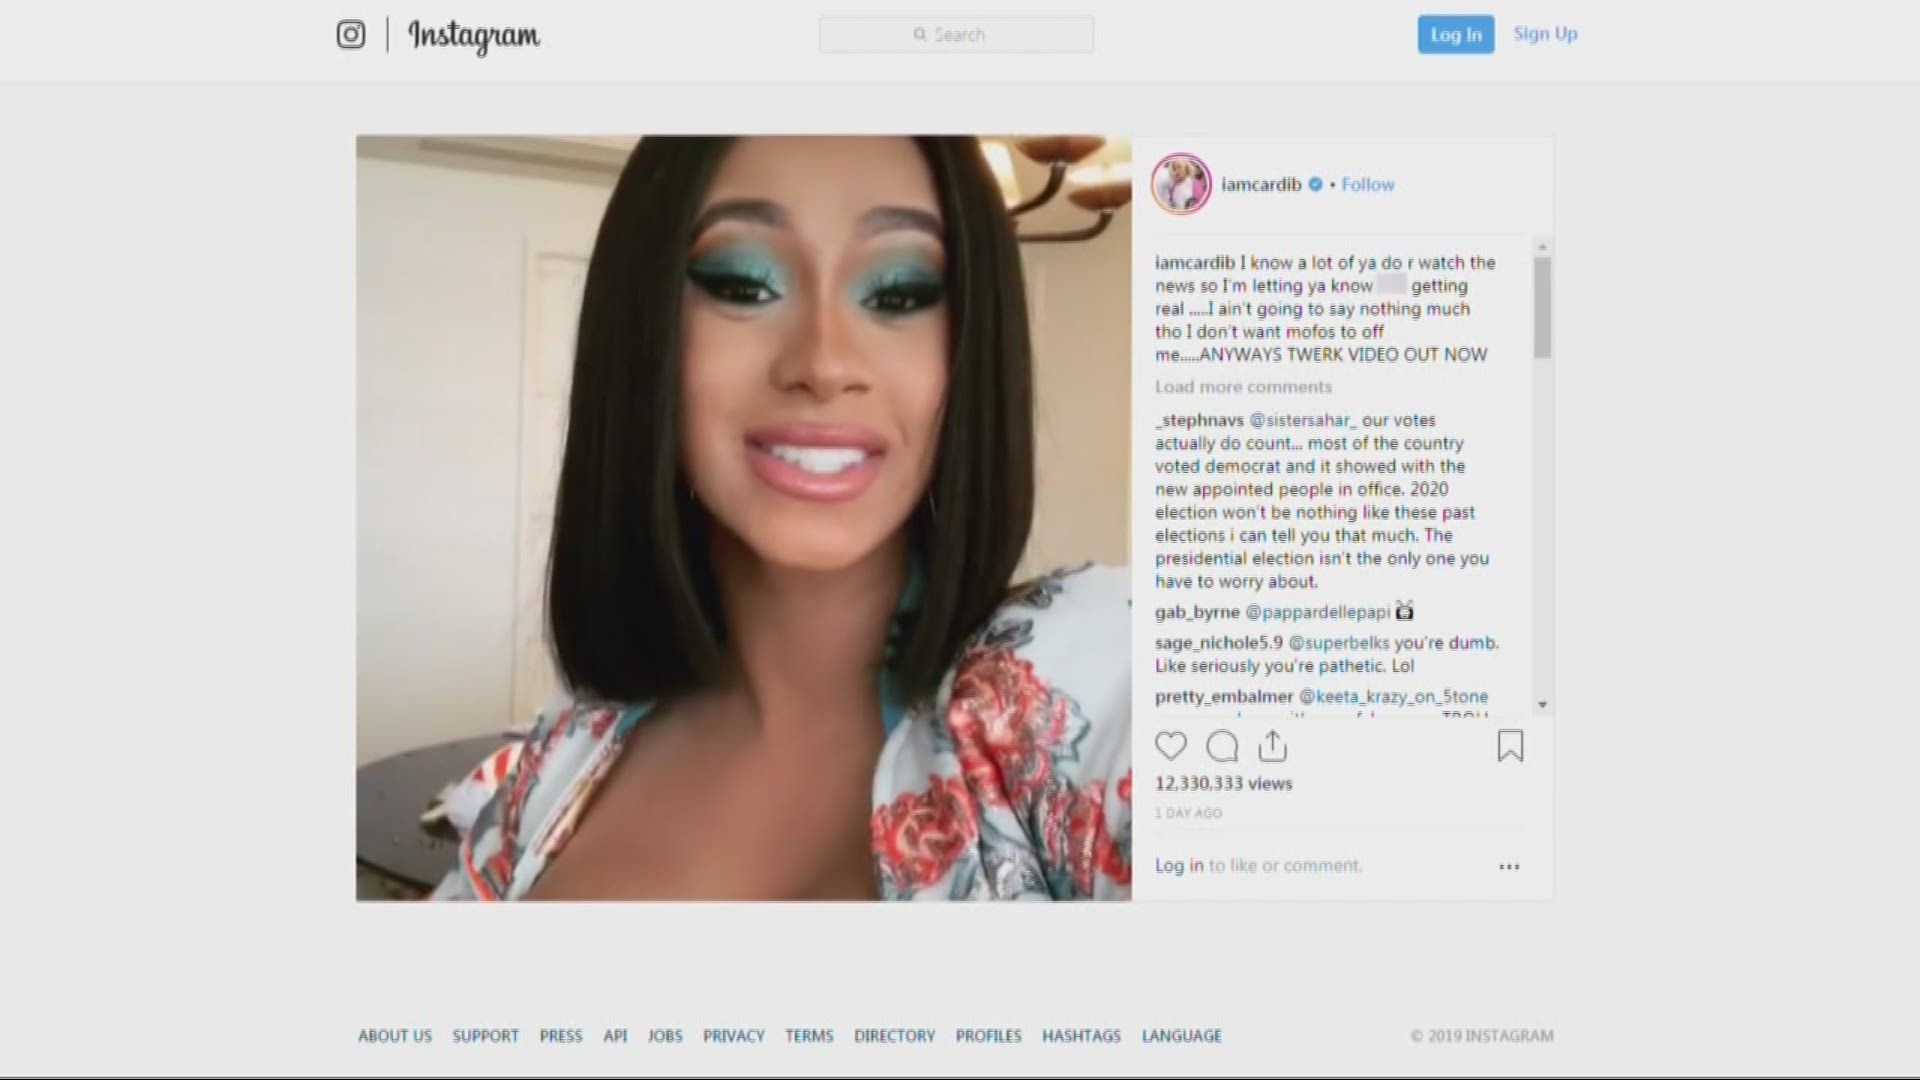 Rapper Cardi B and political commentator Tomi Lahren feud over the government shutdown on social media. Plus, a new invention allows for reusable spoons and forks to attach to cell phones.